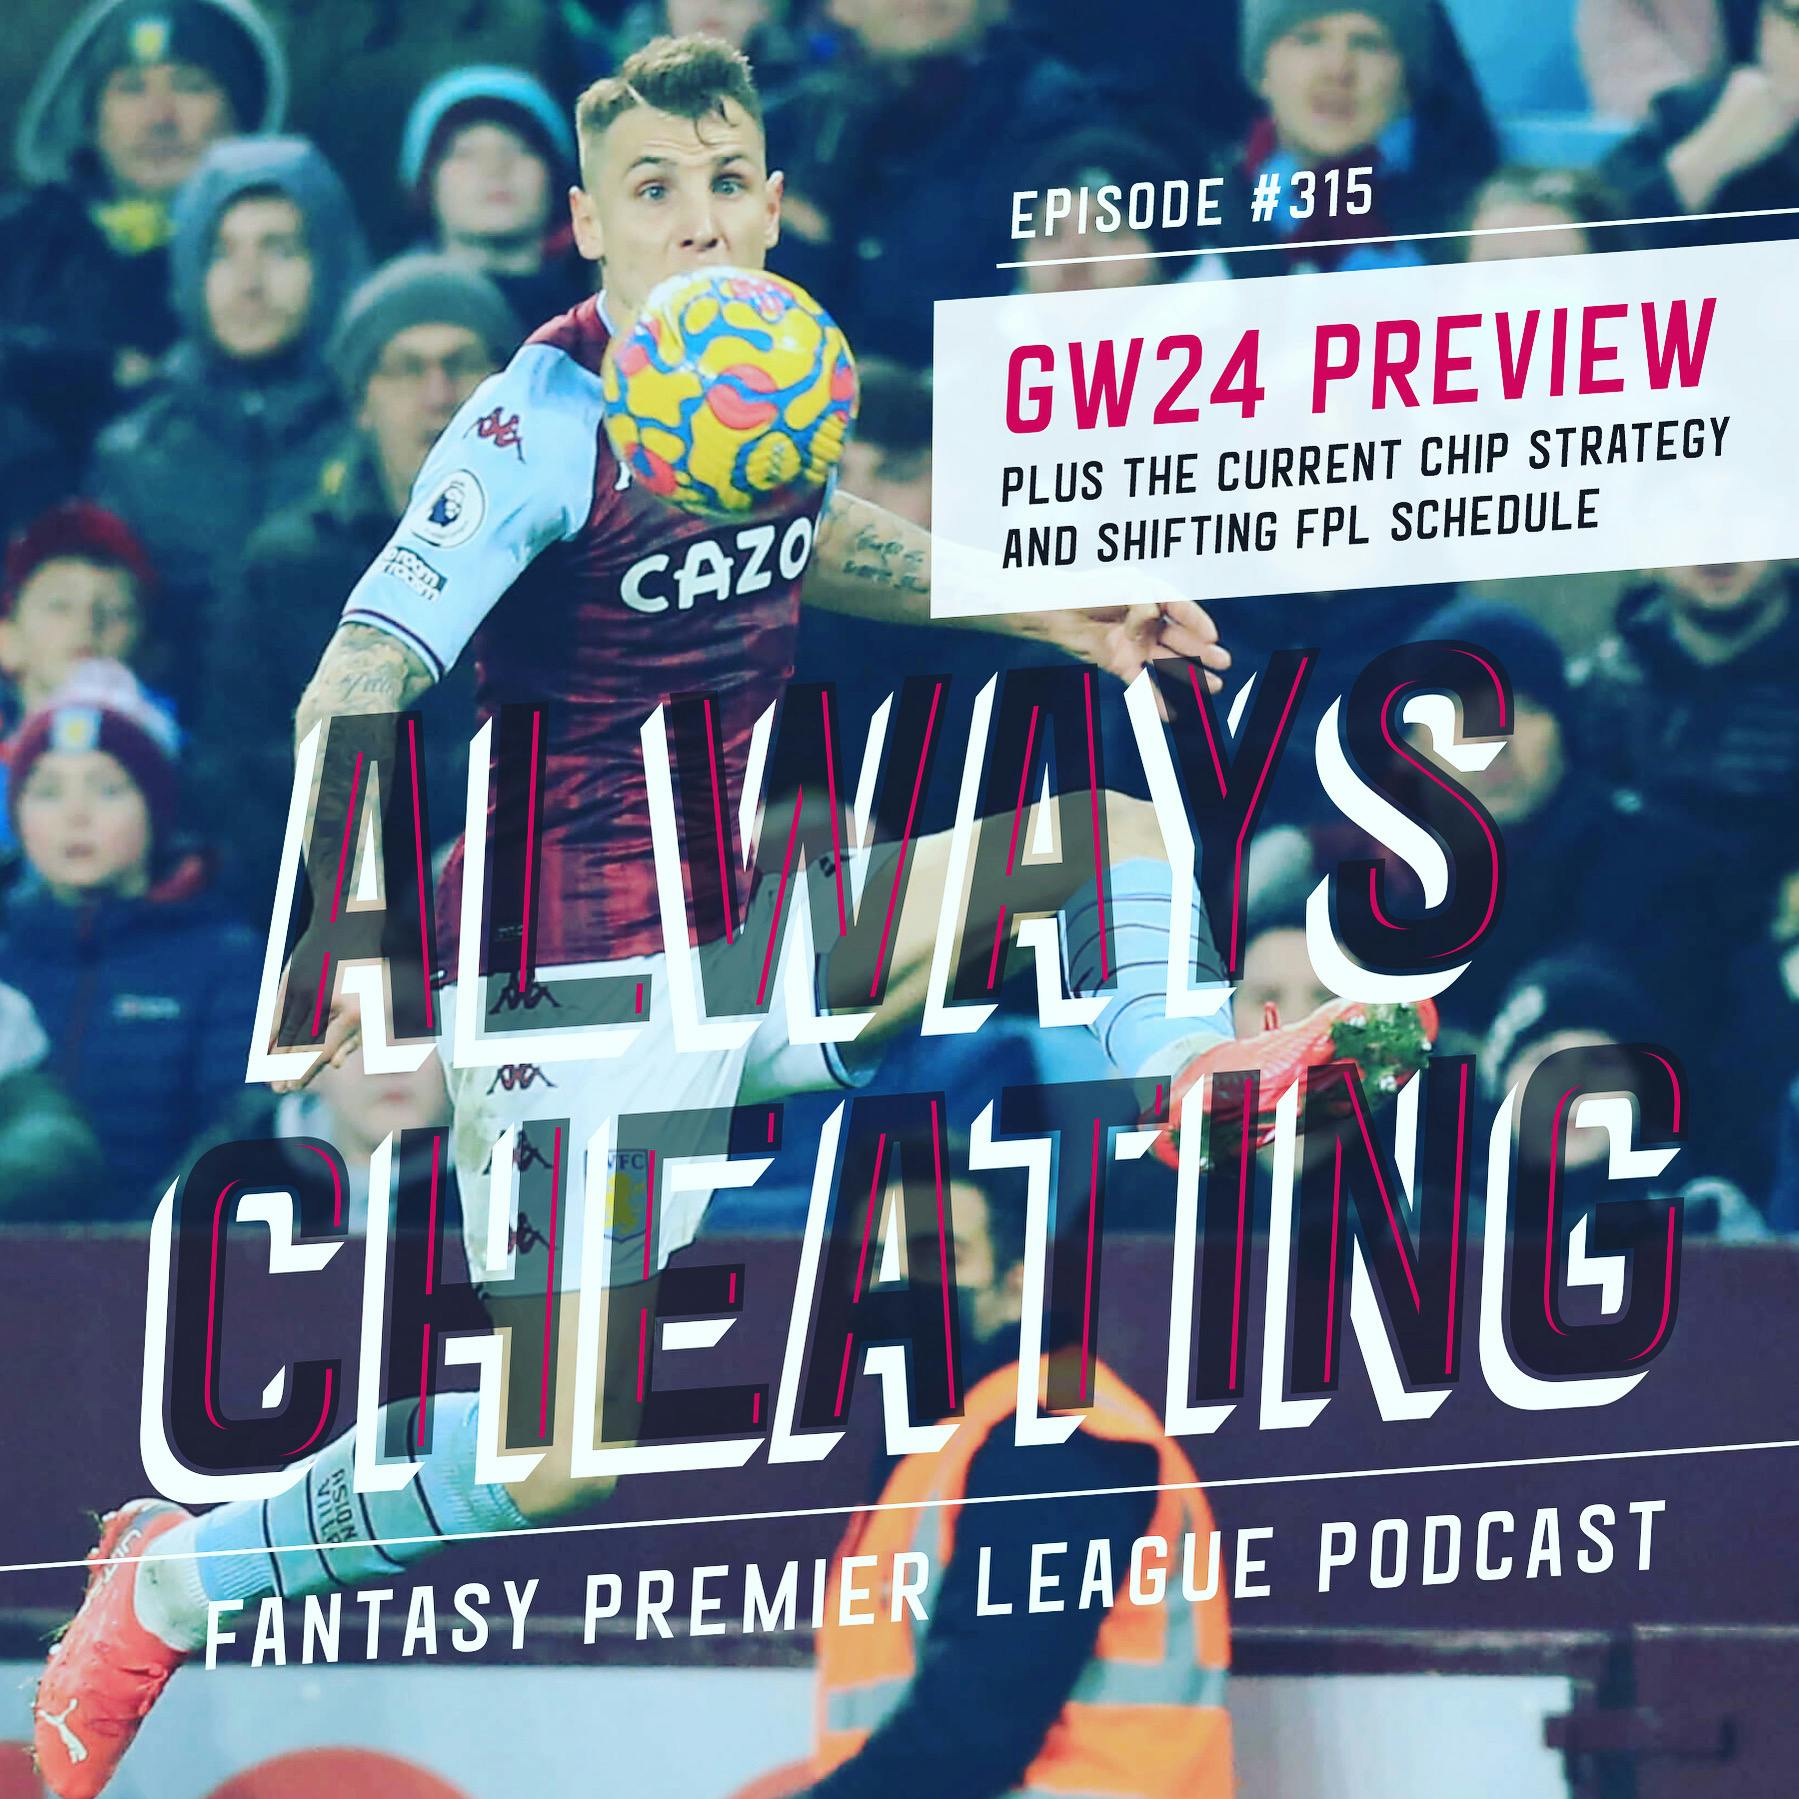 The Current FPL Chip Strategy & GW24 Preview